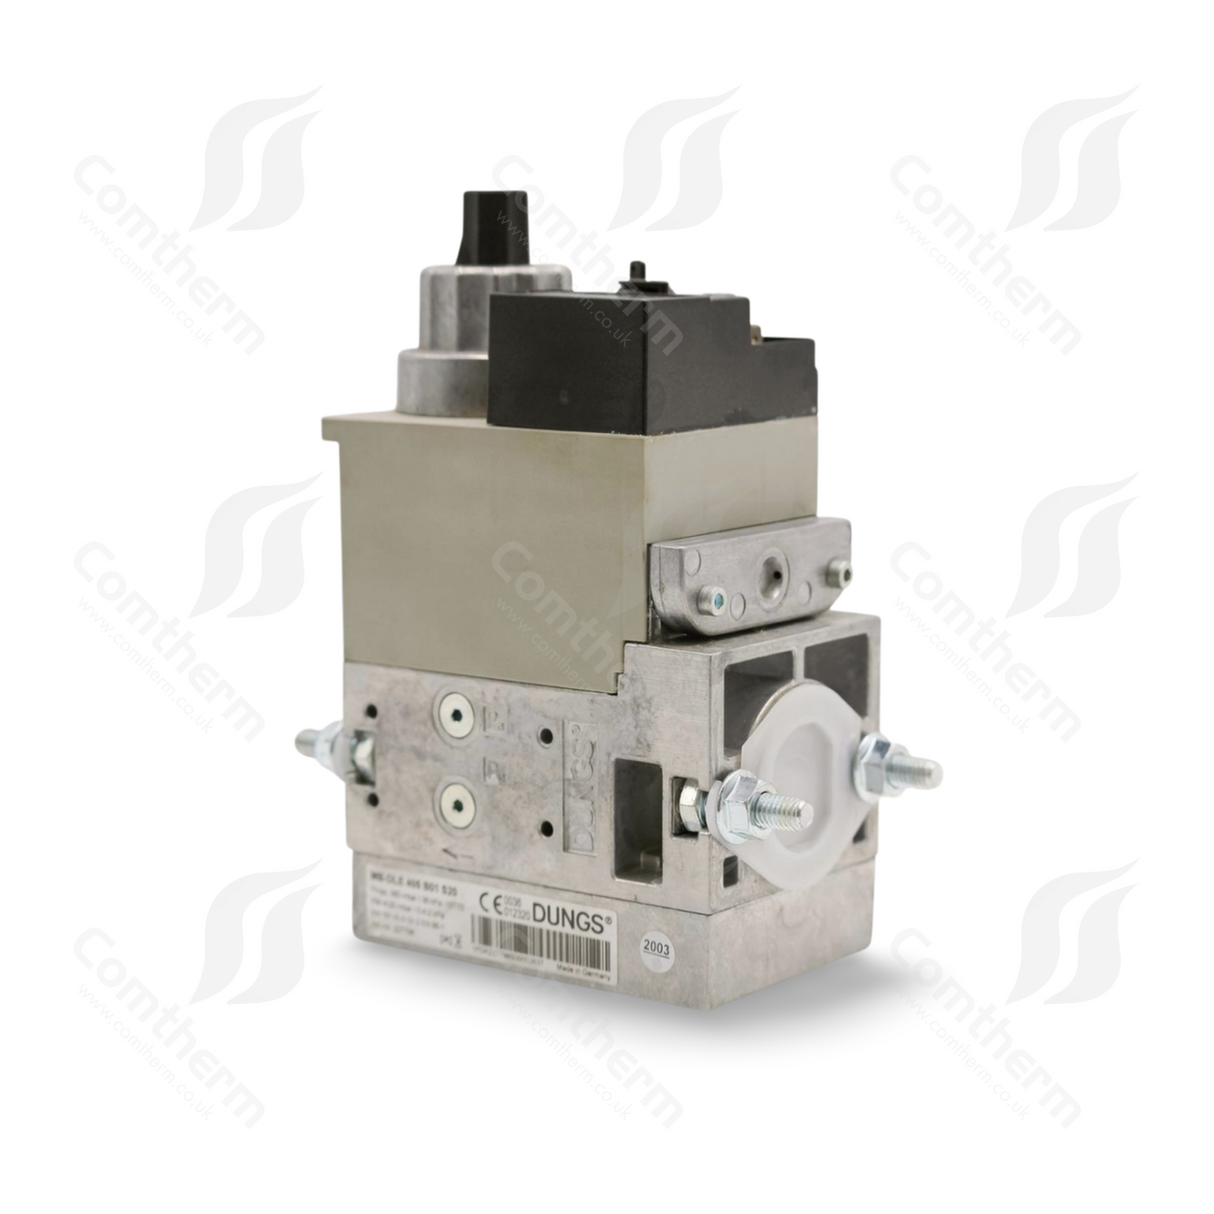 Dungs MB-DLE 412 B07 S20 Multibloc Gas Valve - 110v